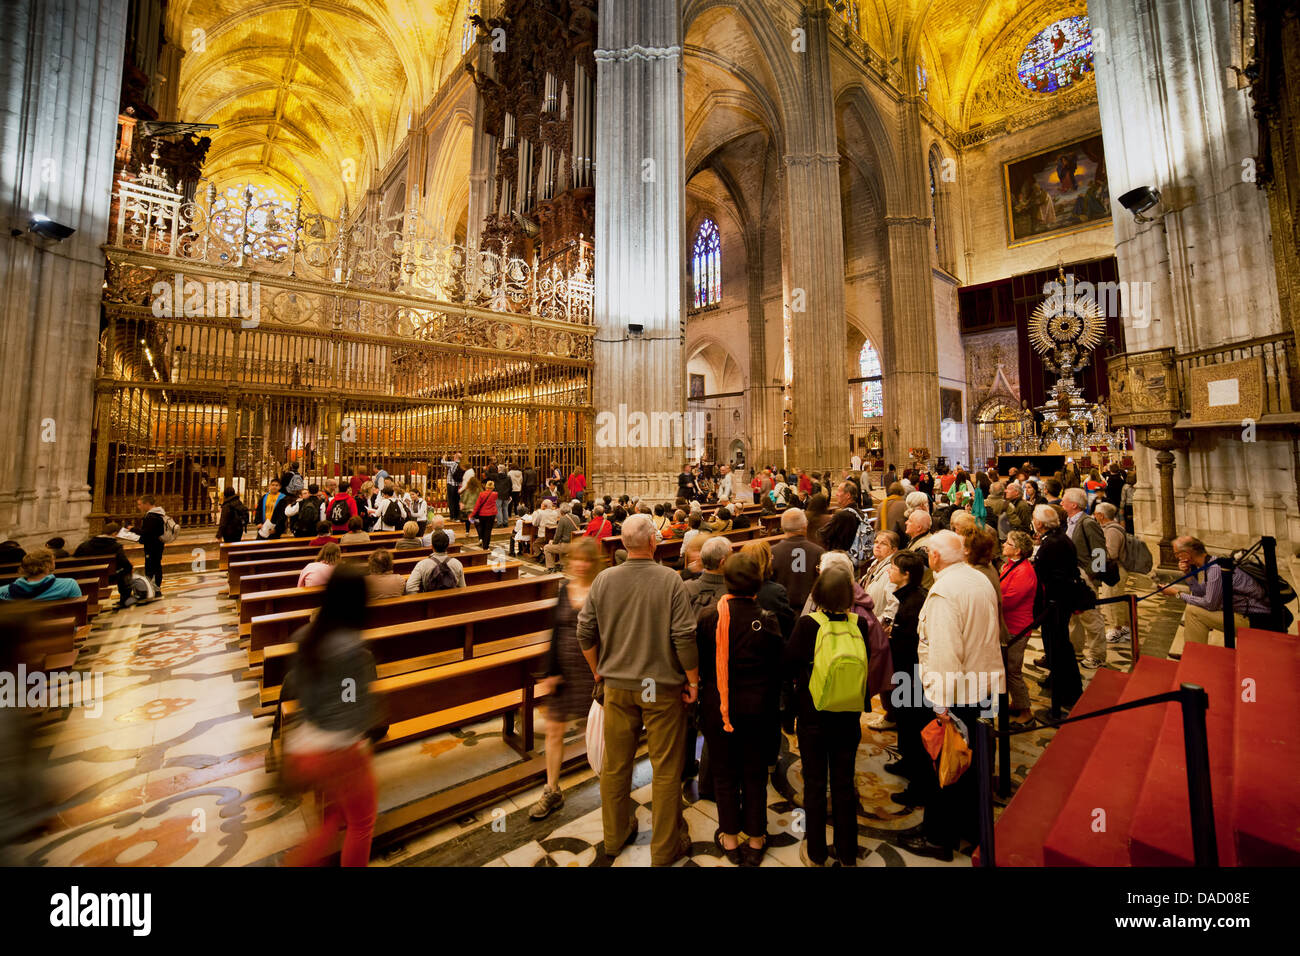 Group of tourists on sightseeing tour in the Seville Cathedral, Andalusia, Spain. Stock Photo